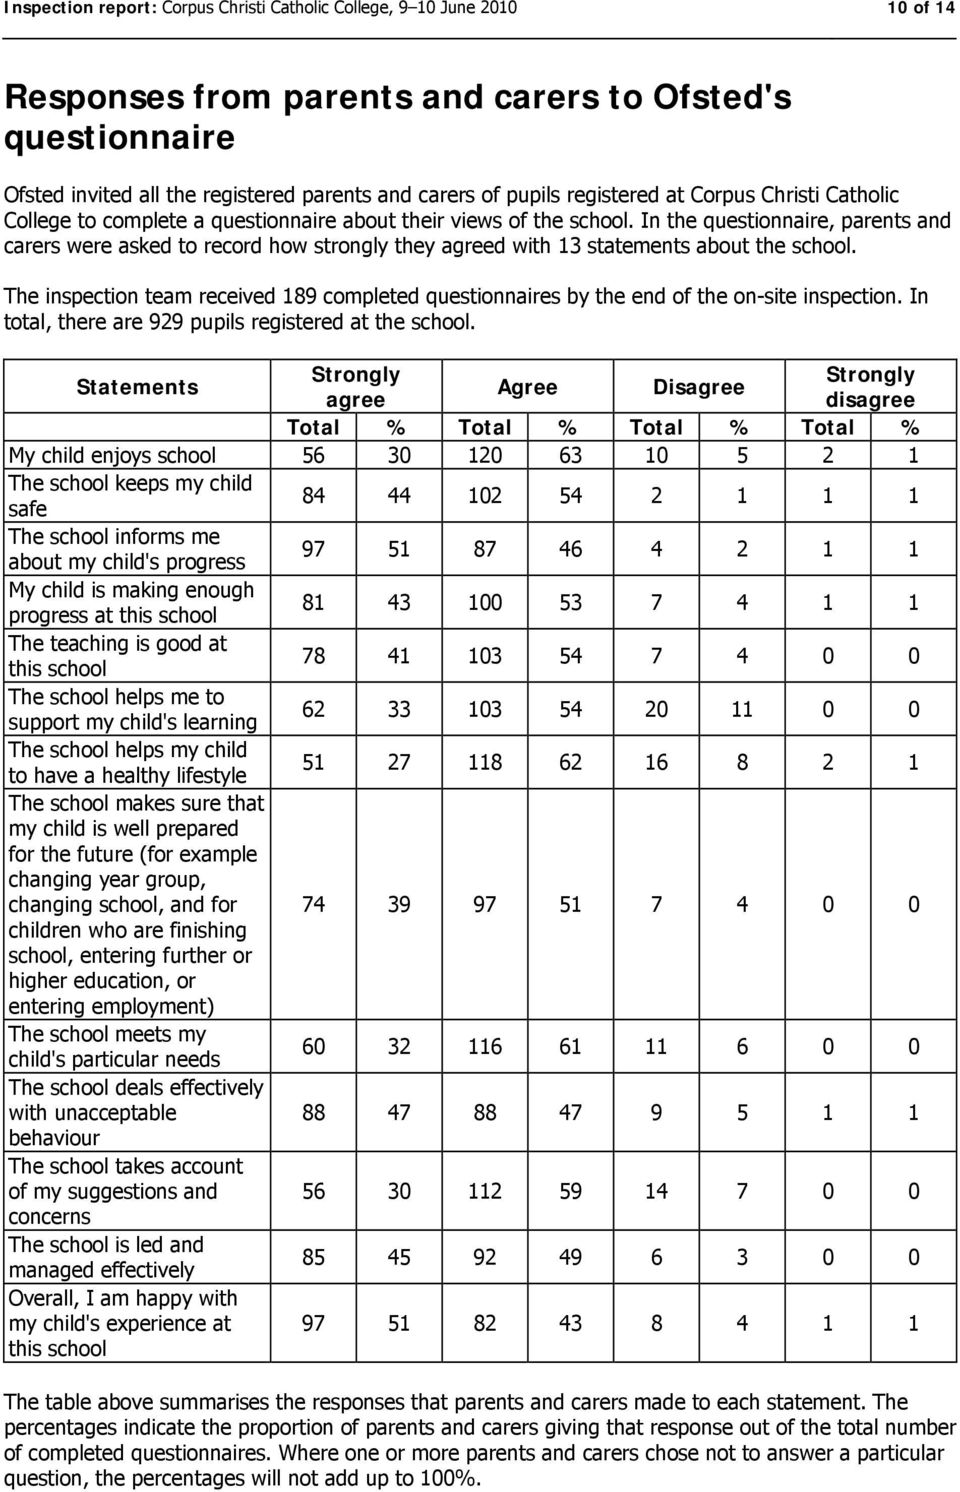 In the questionnaire, parents and carers were asked to record how strongly they agreed with 13 statements about the school.